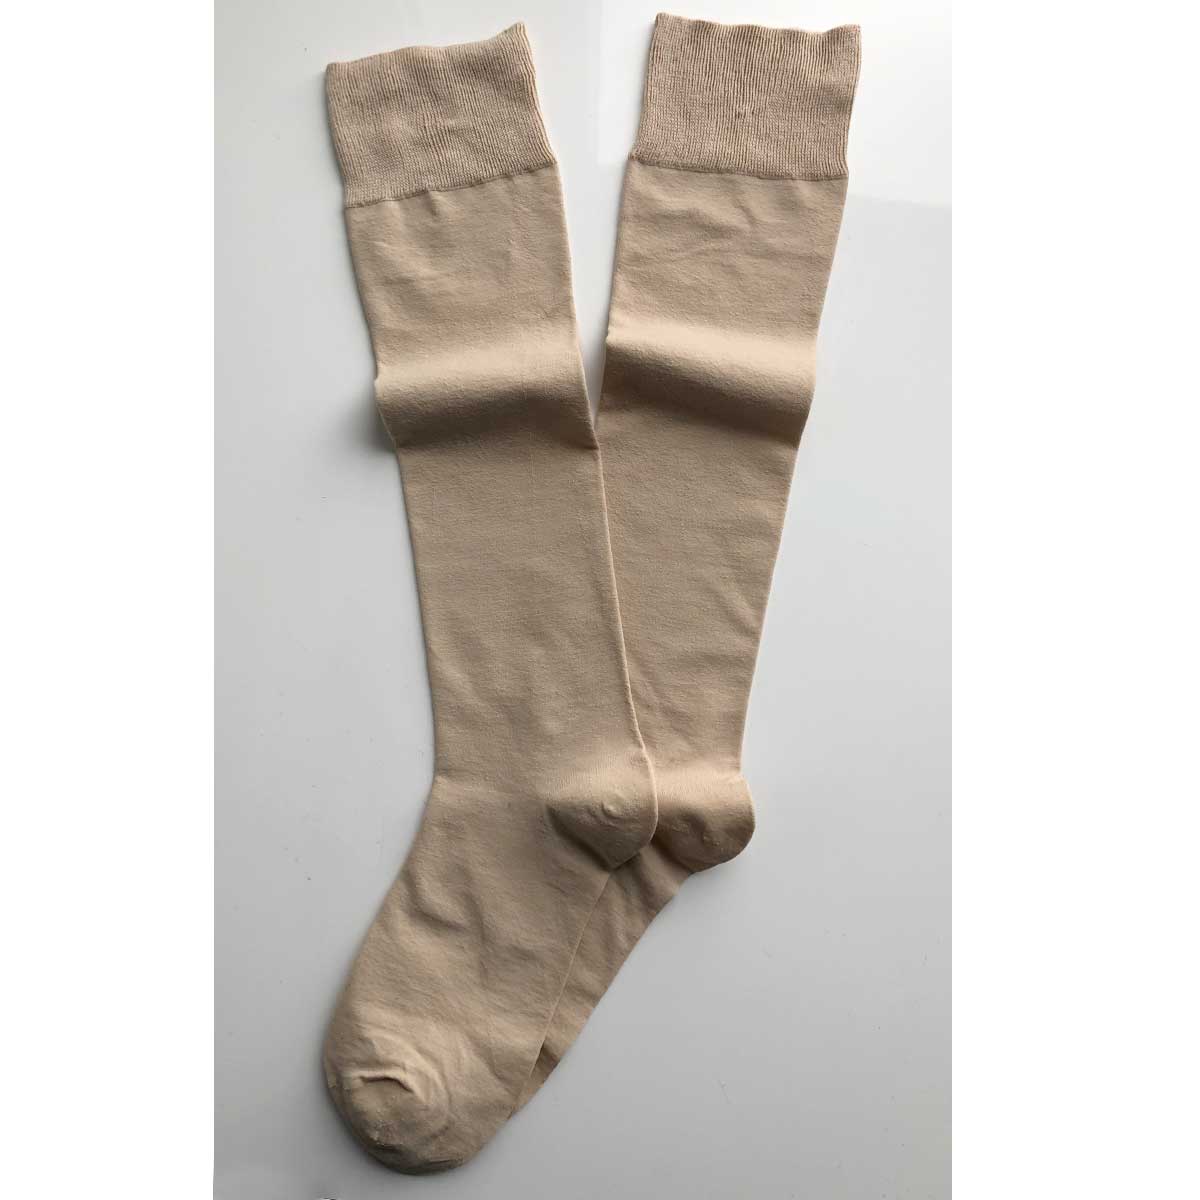 Extra thin and fine knee socks in 82% cotton